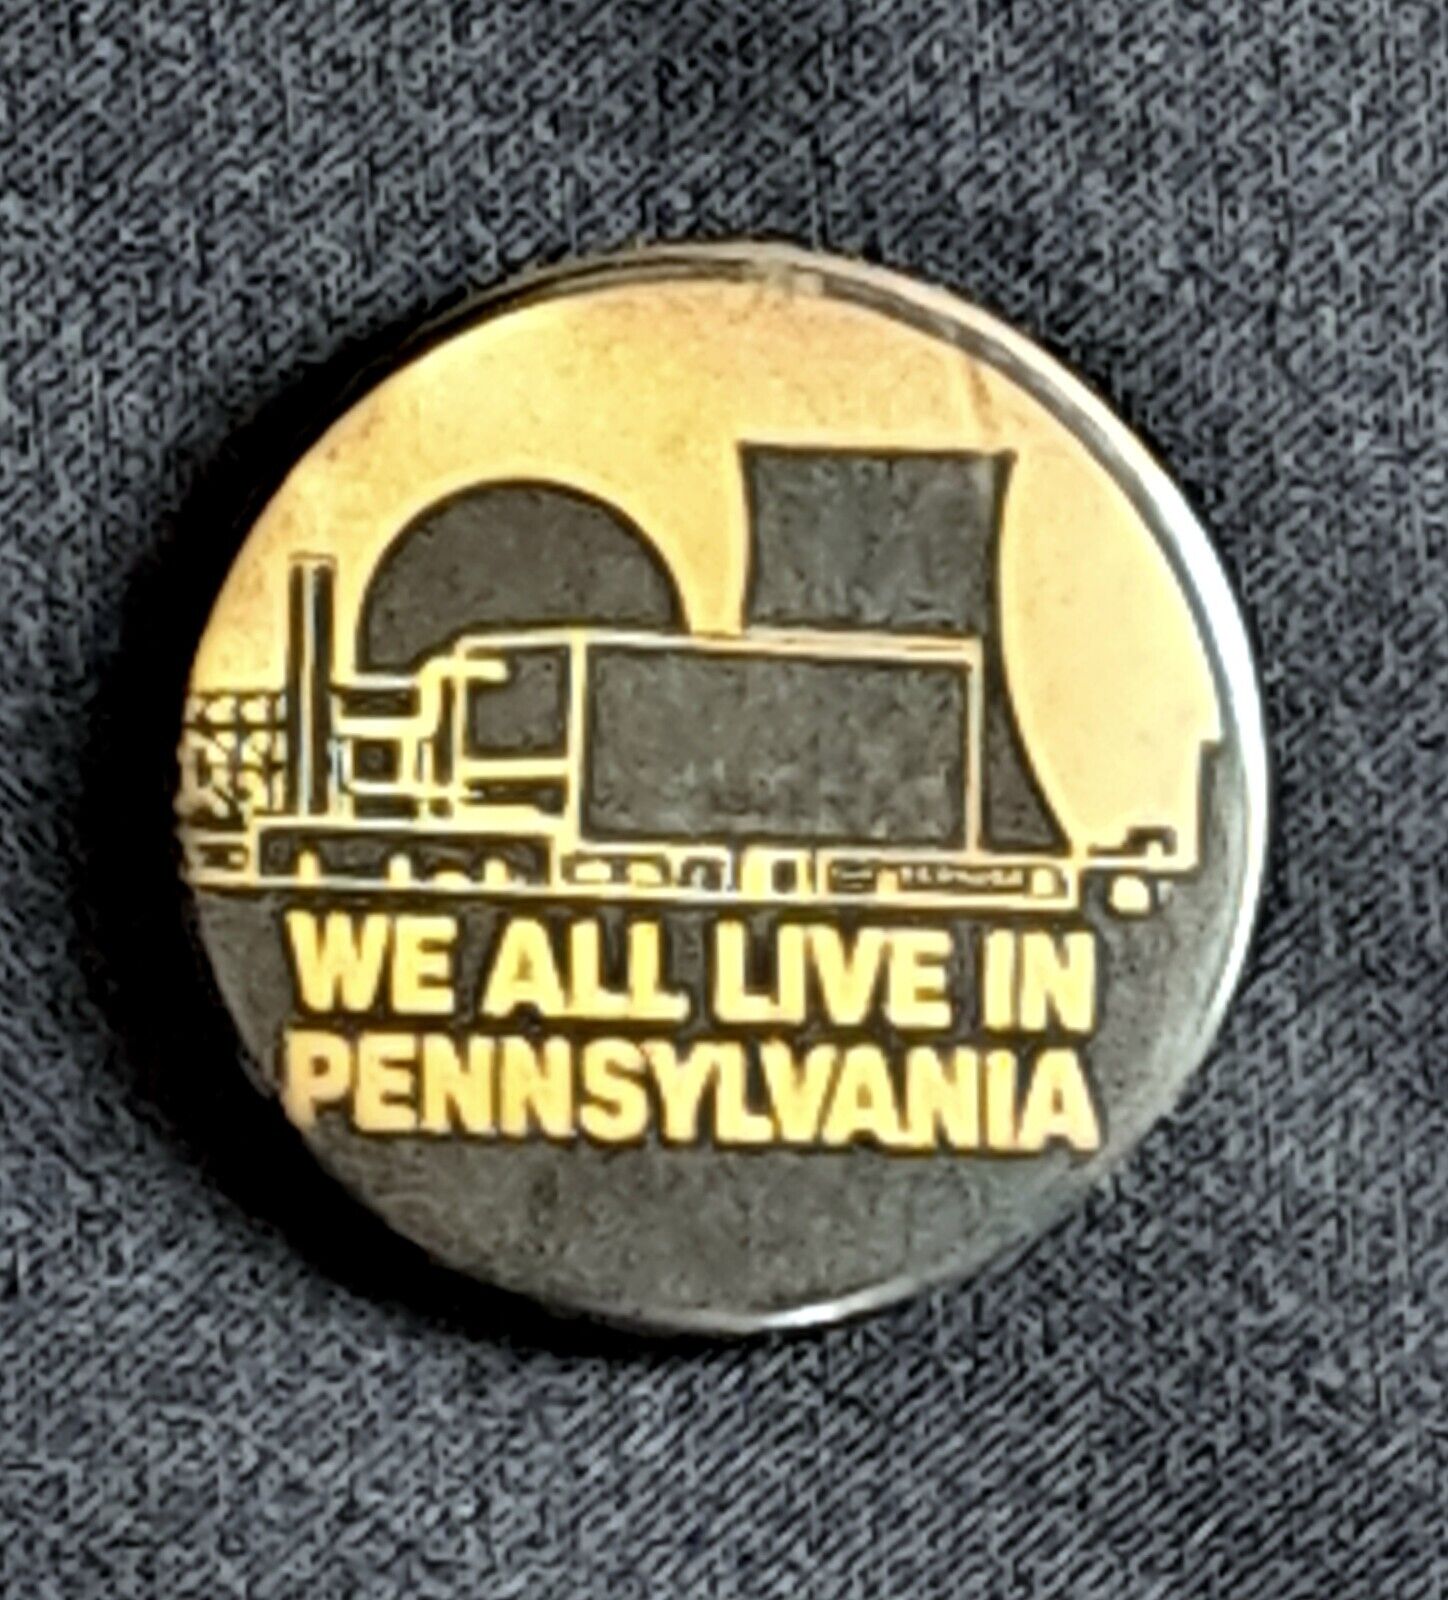 We All Live in Pennsylvania Nuclear Three Mile Island Protest Pinback/Pin